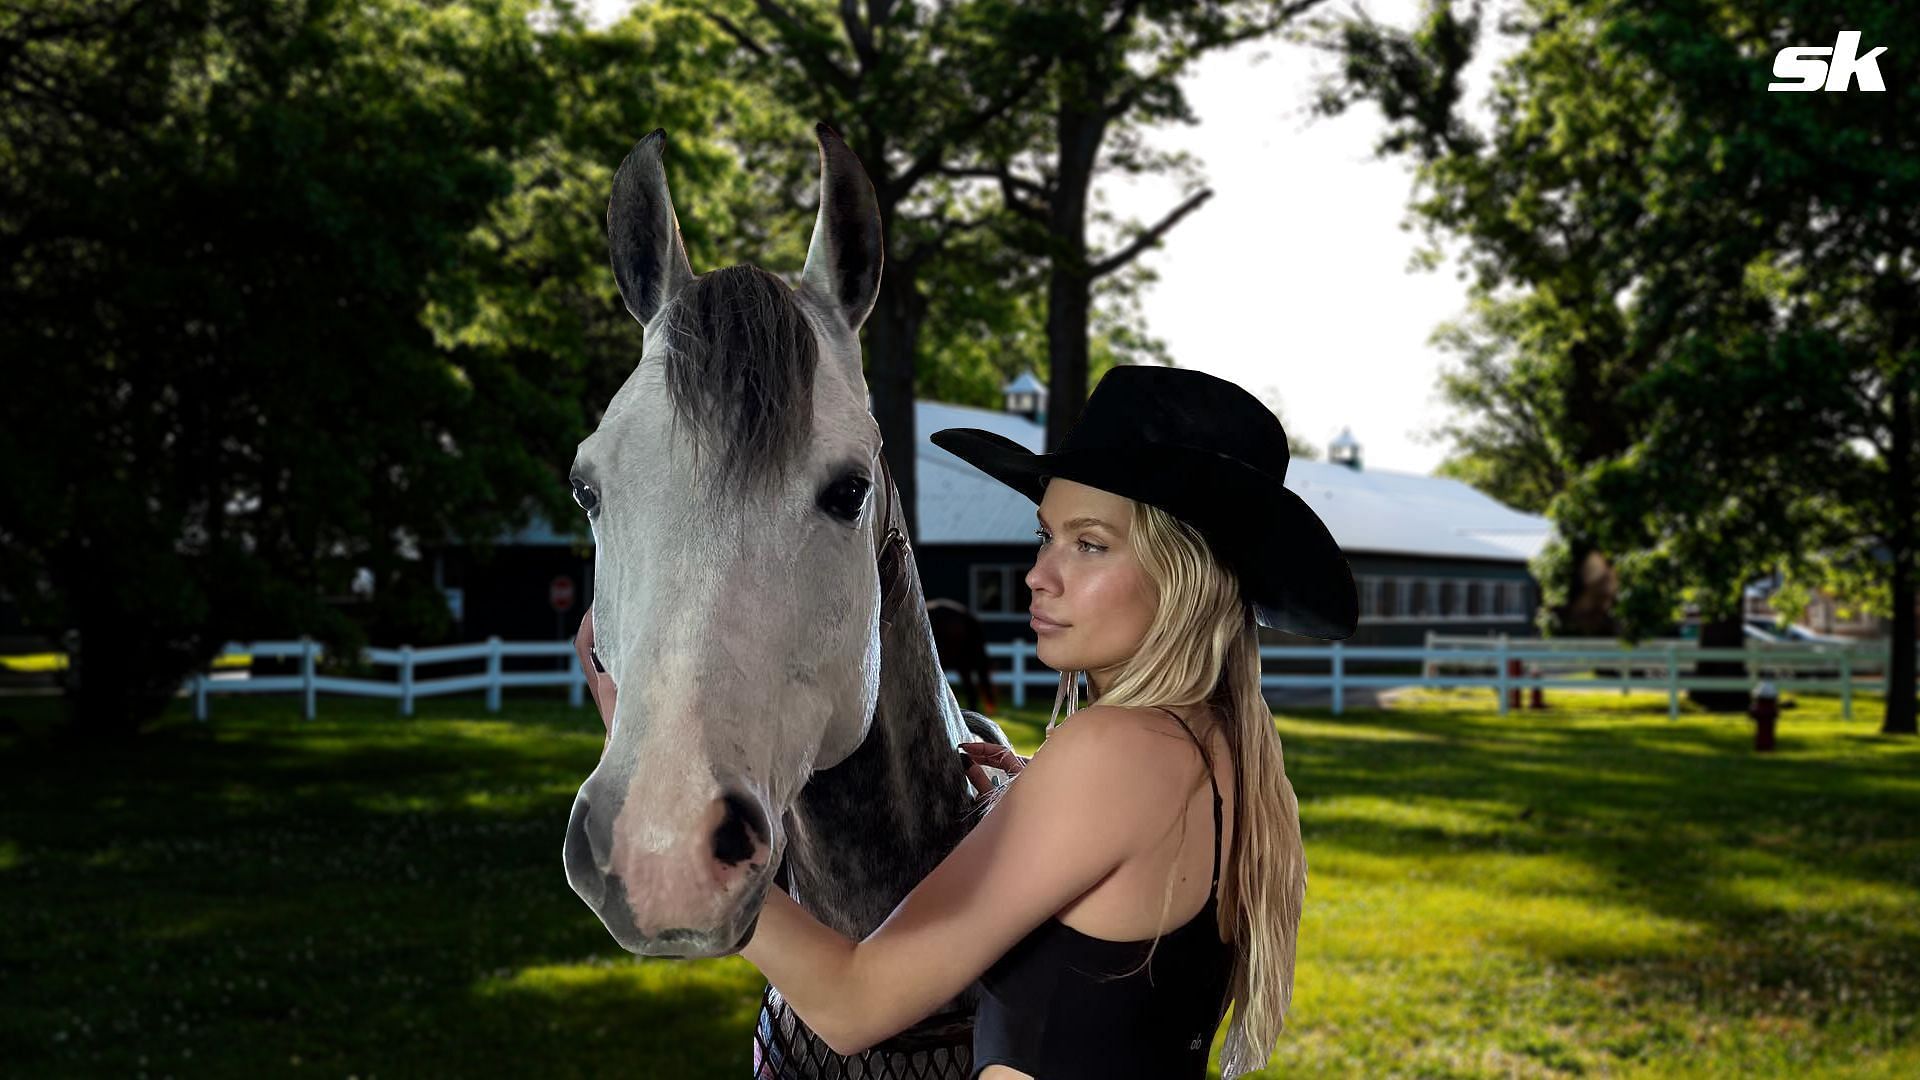 Josie Canseco rocks her equestrian elegance with cowgirl flair